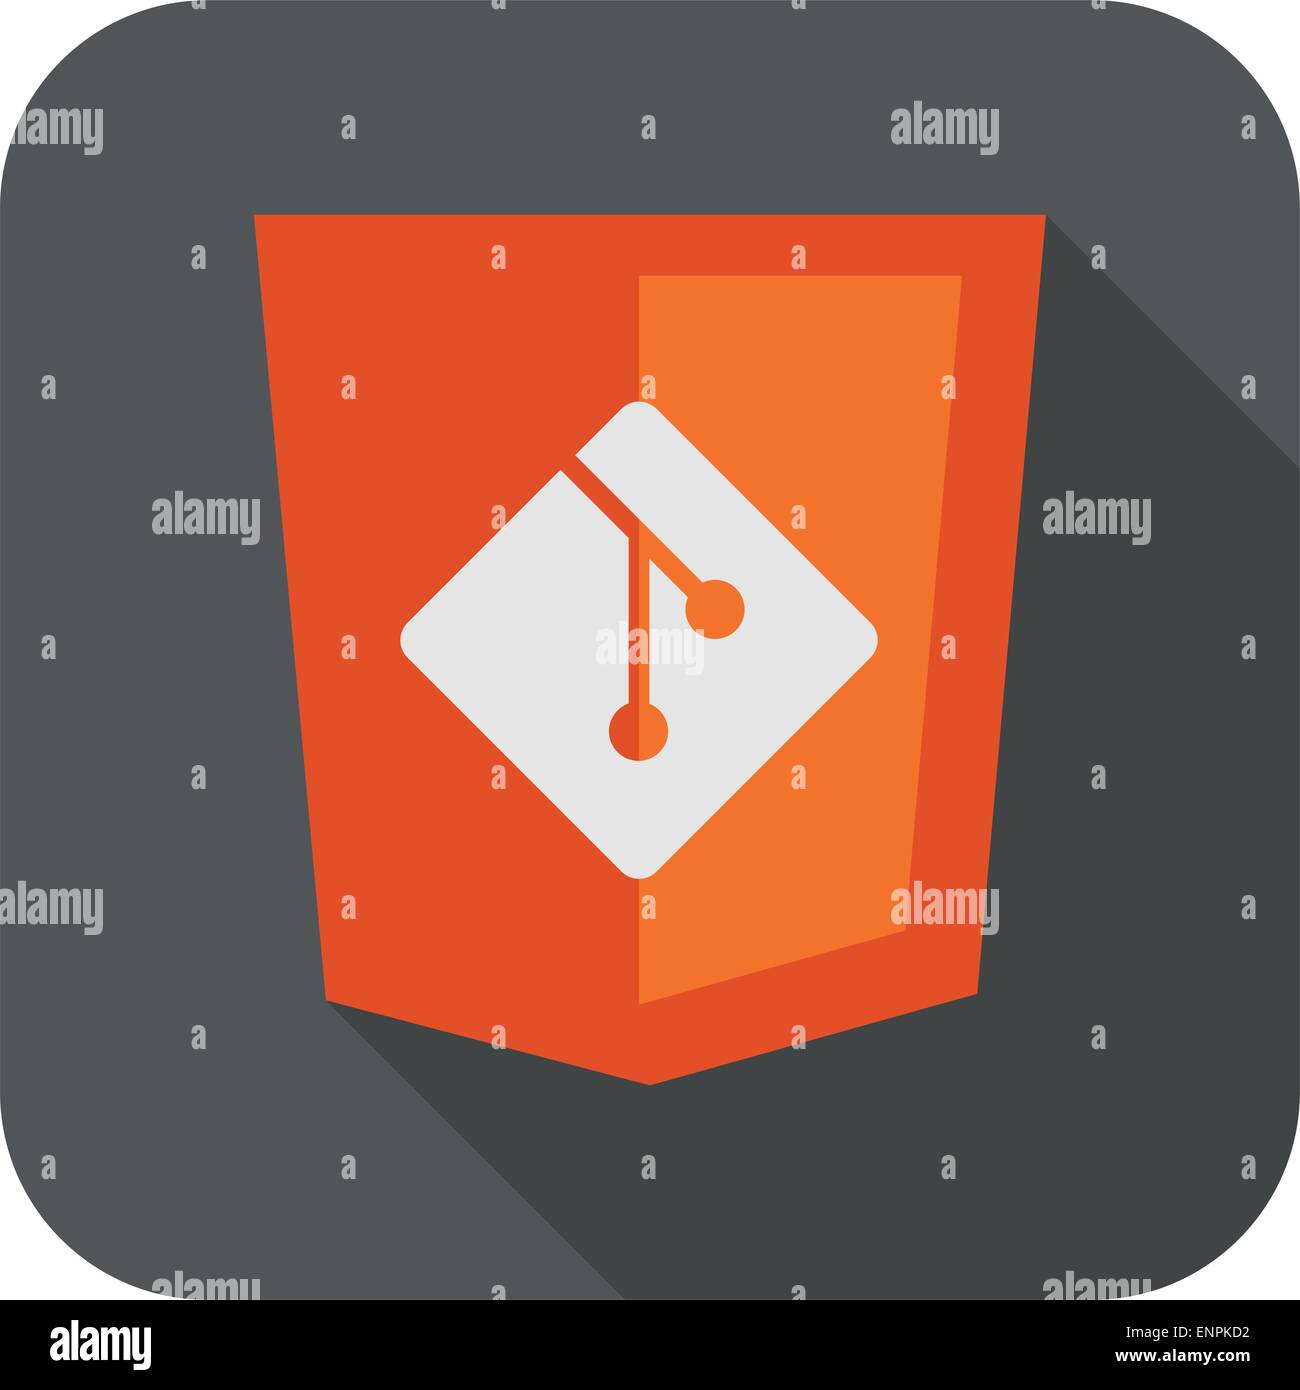 vector illustration web development shield sign showing programming process icon version control system Stock Vector